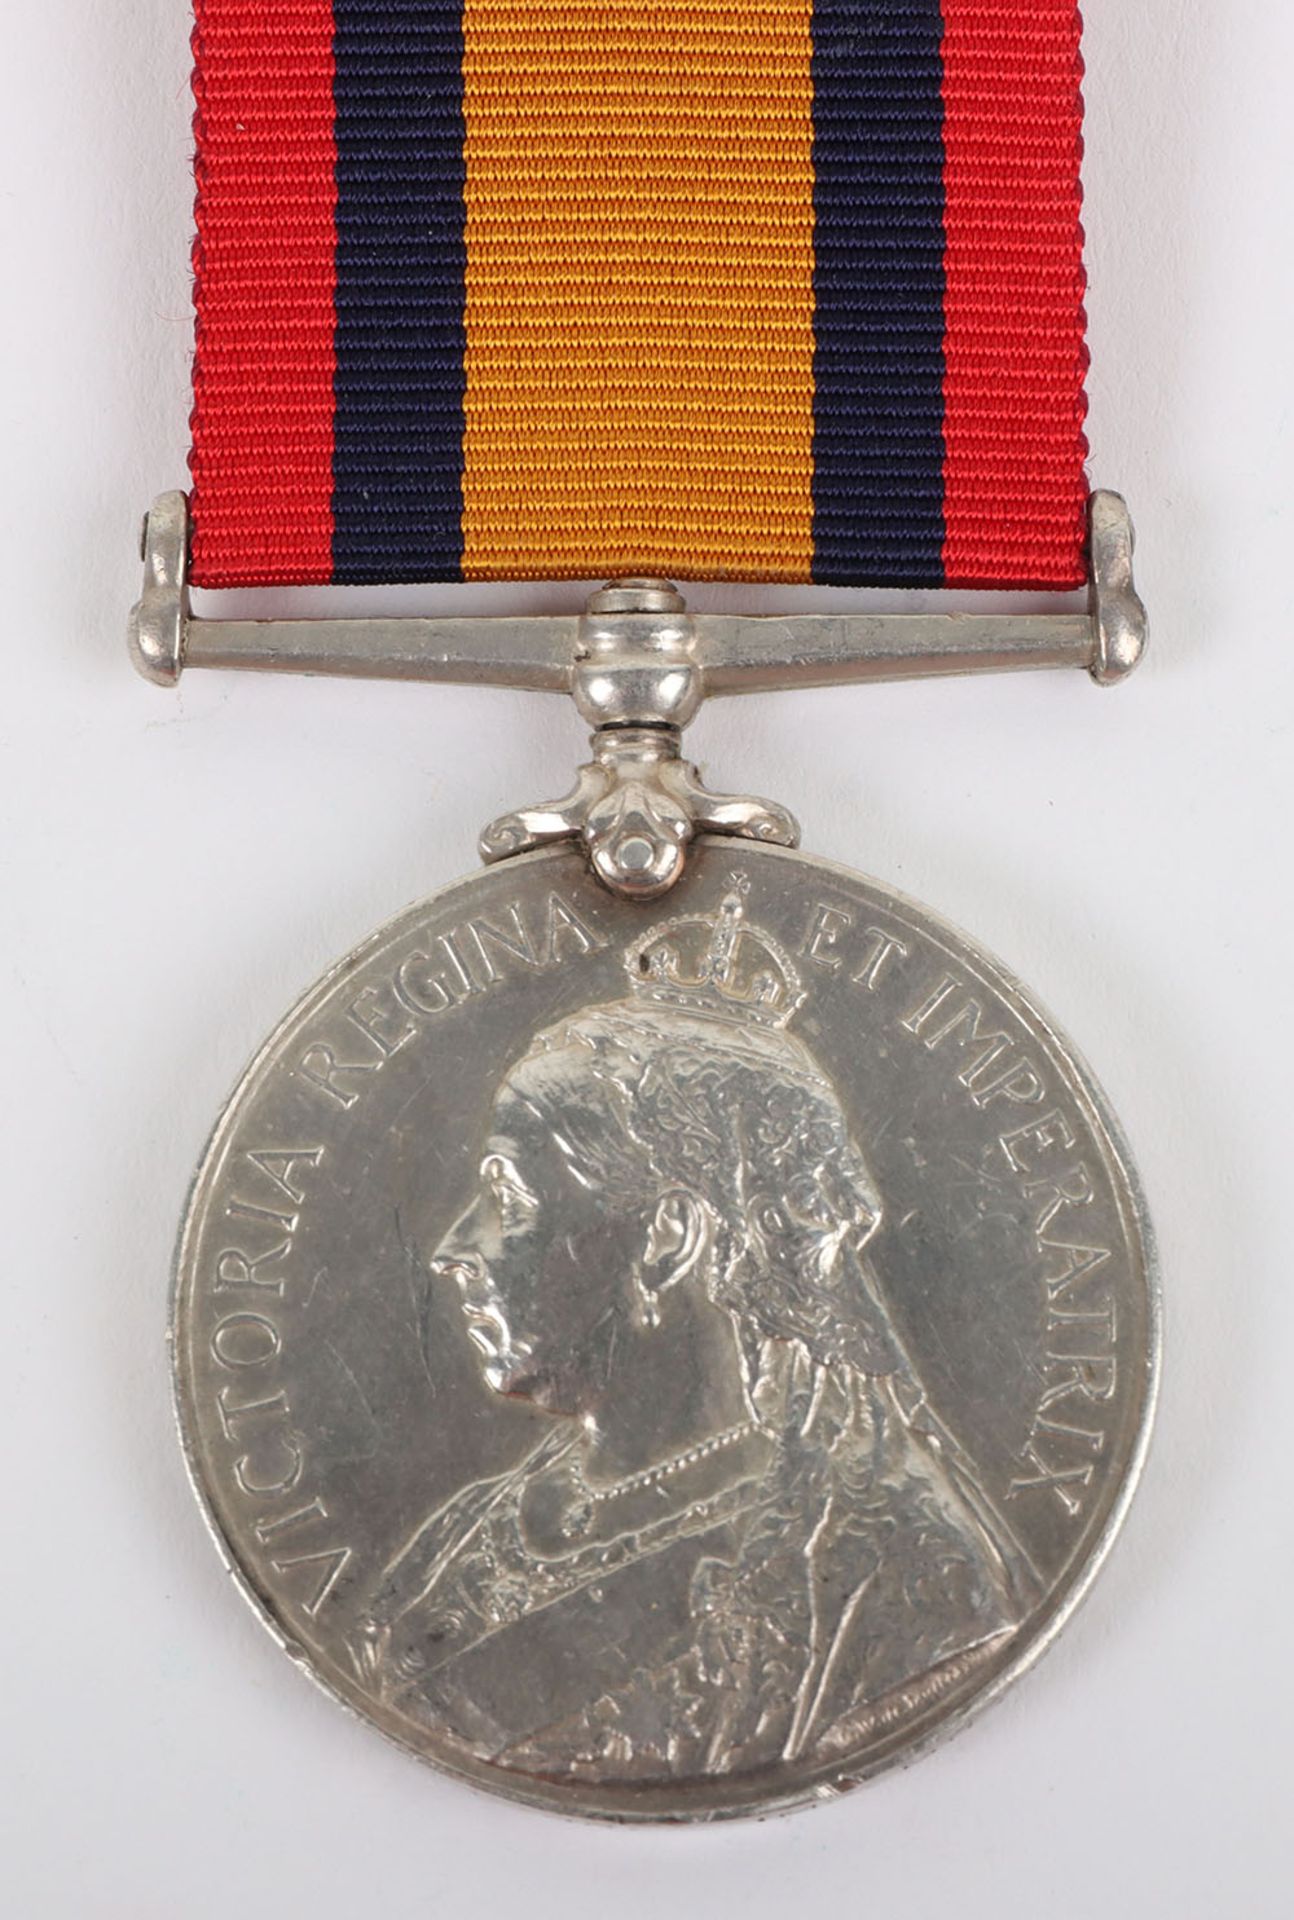 Queens South Africa Medal to the Imperial Military Railway